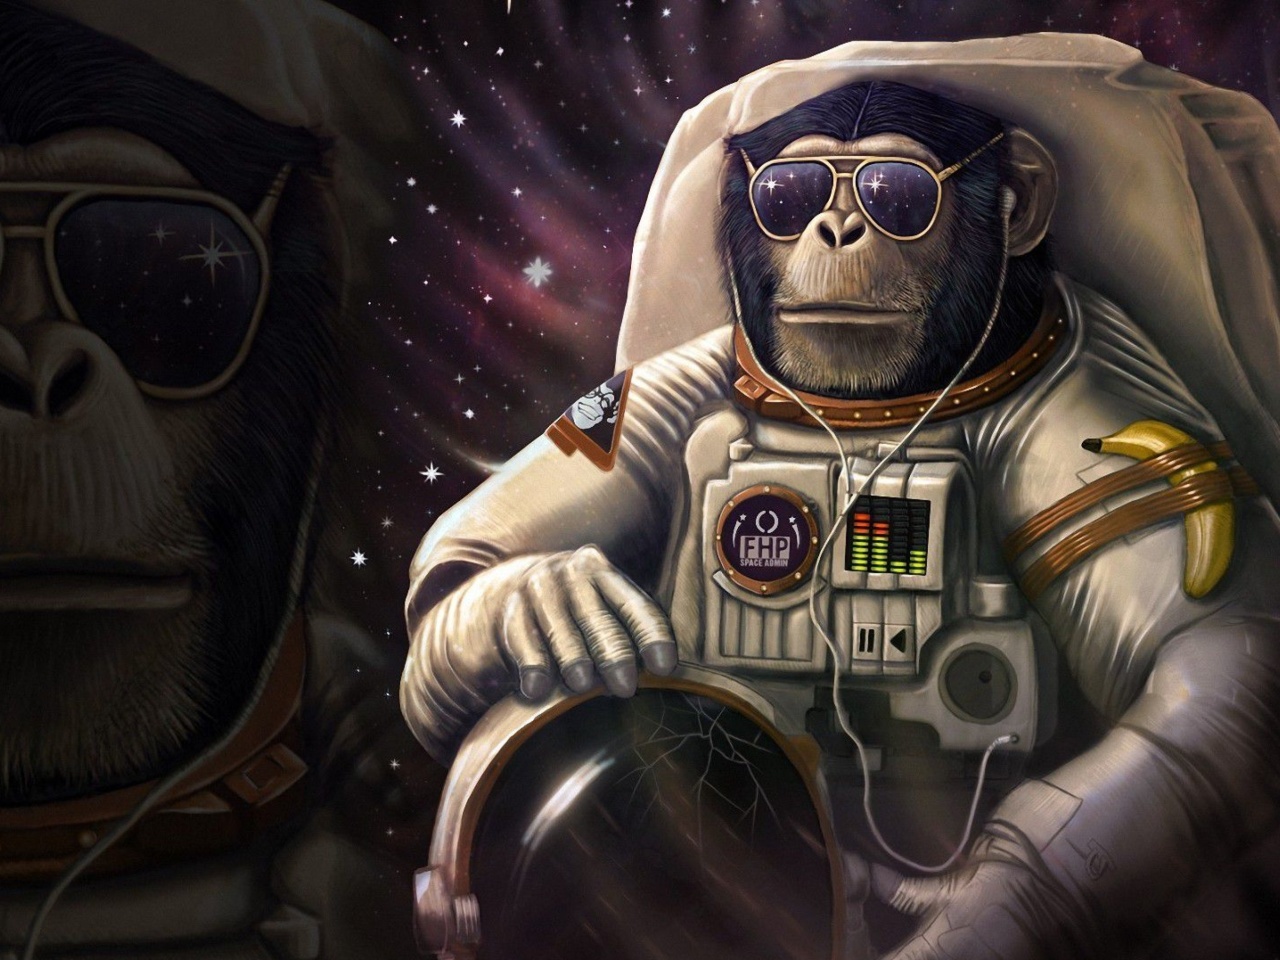 Monkeys and apes in space wallpaper 1280x960